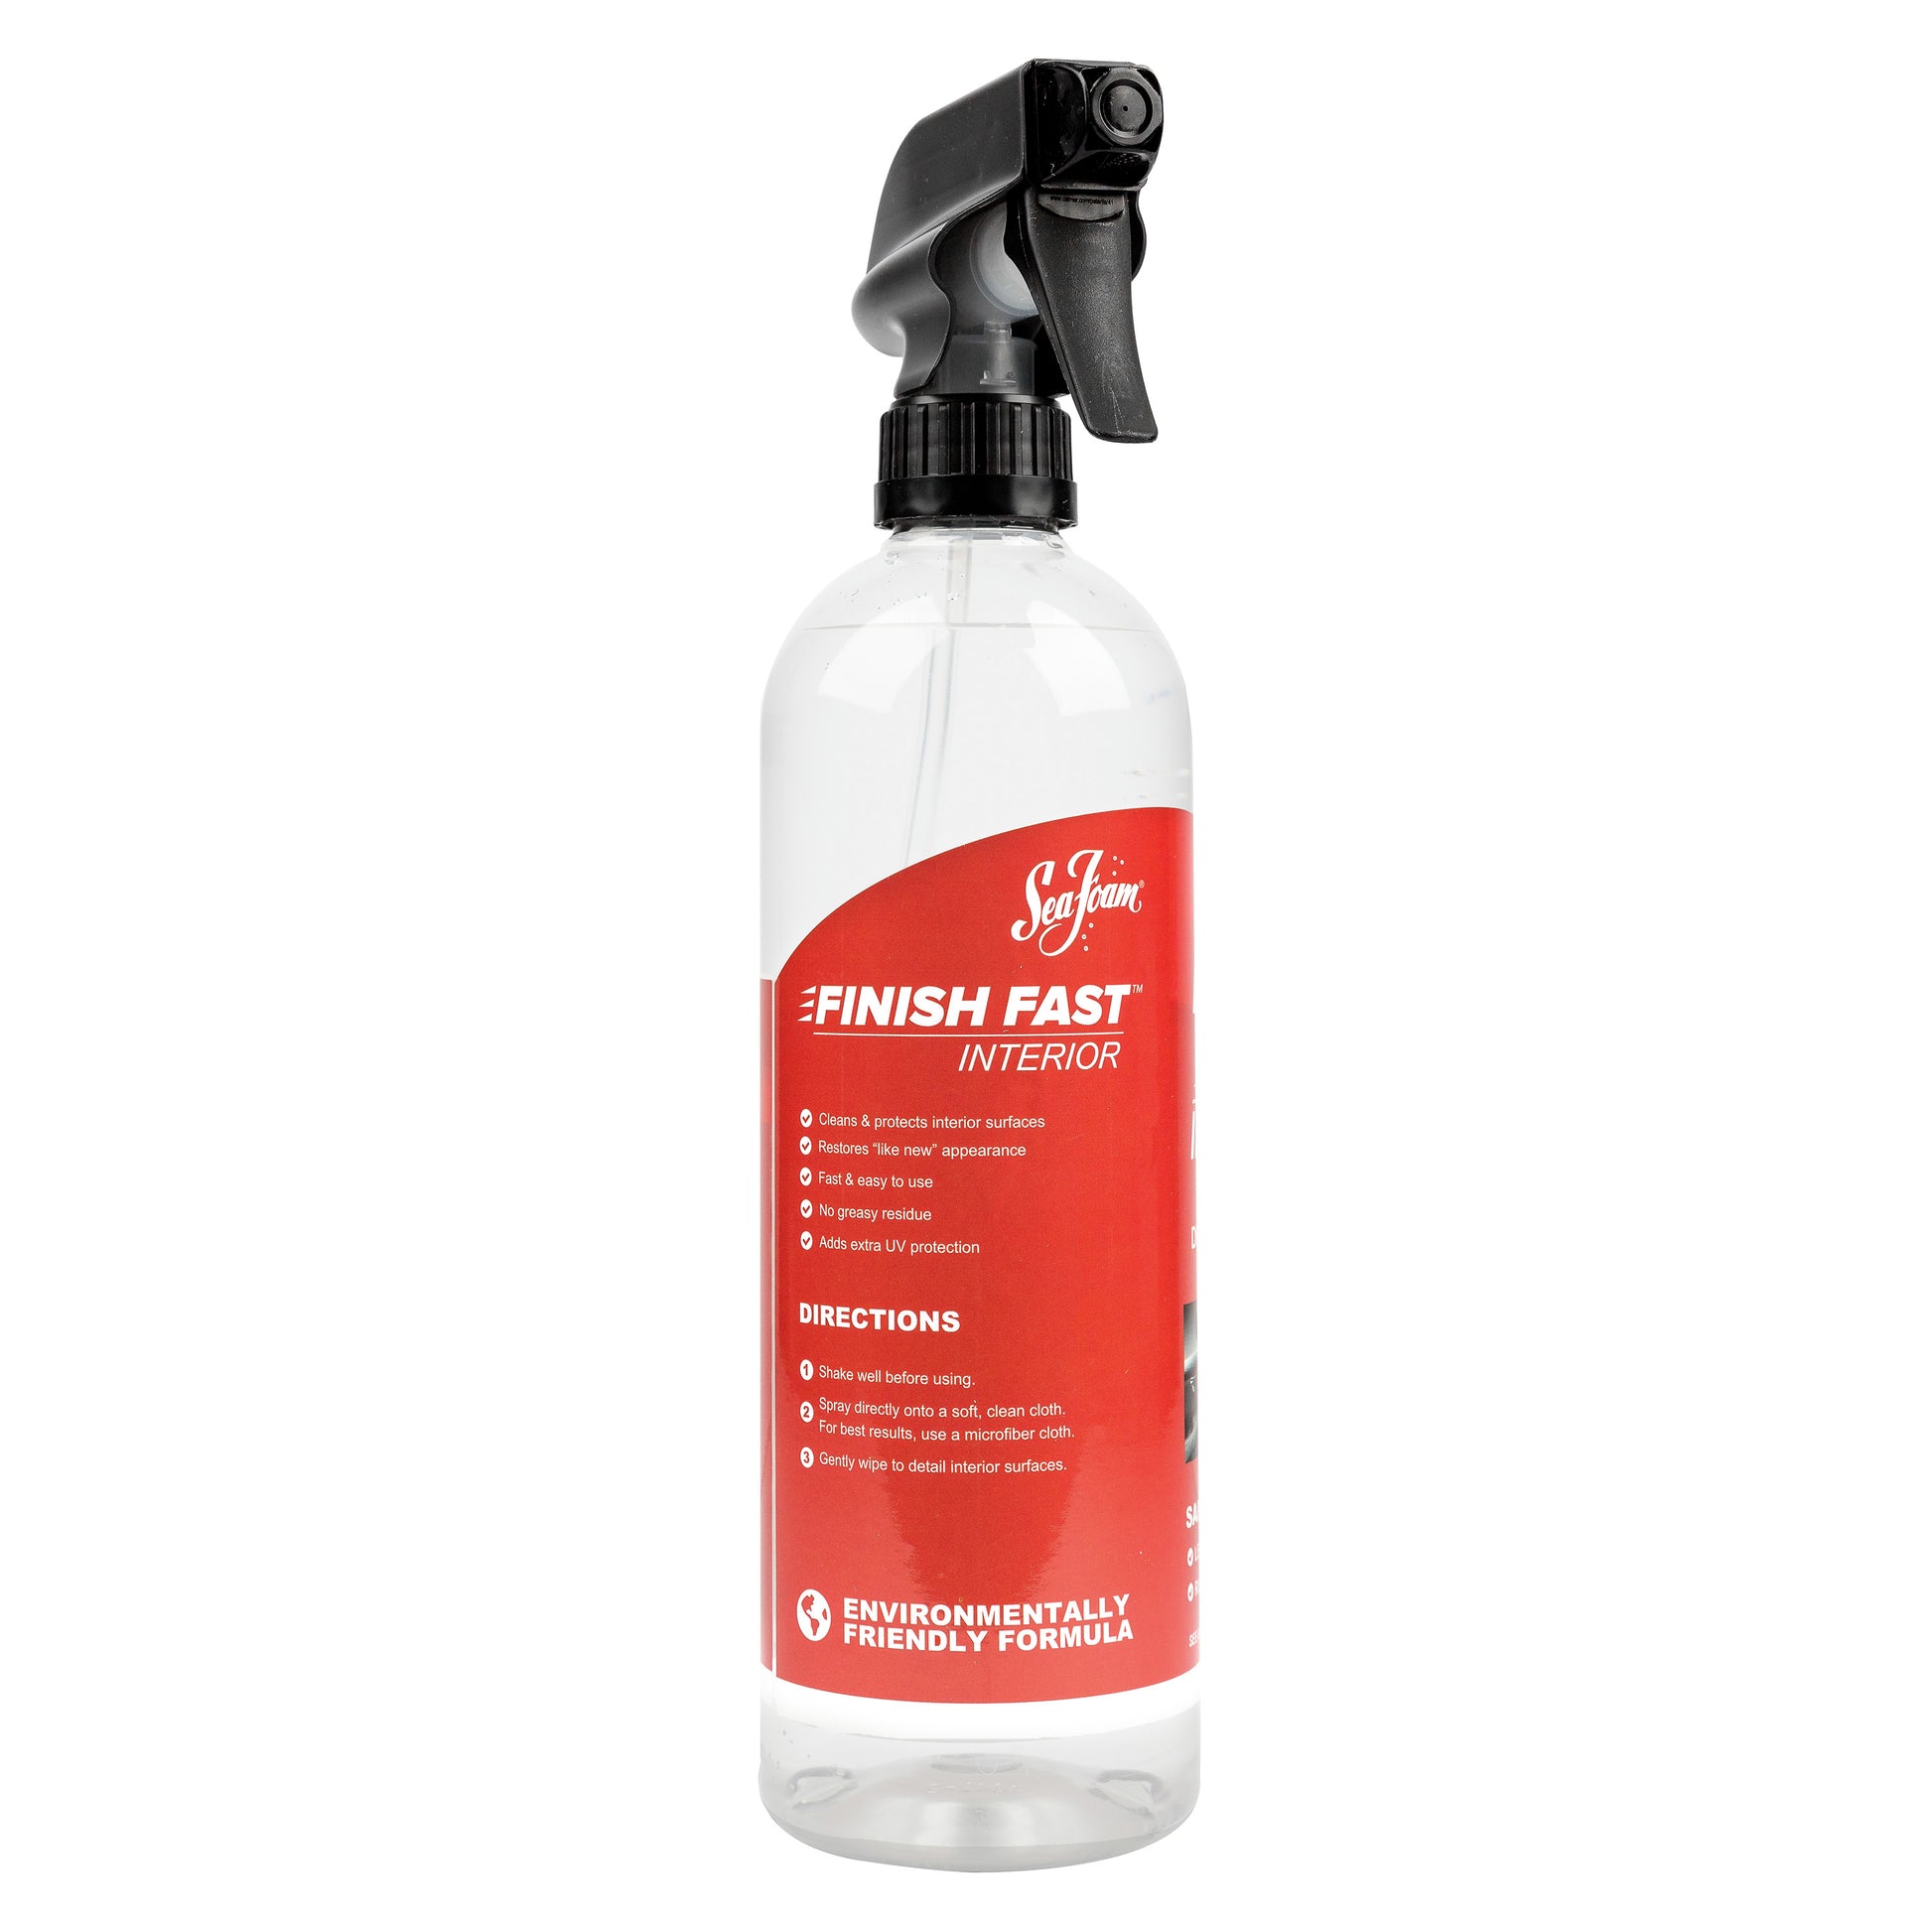 Plastic Spray Bottle (24oz 2 Pack) for Cleaning Solutions, Car